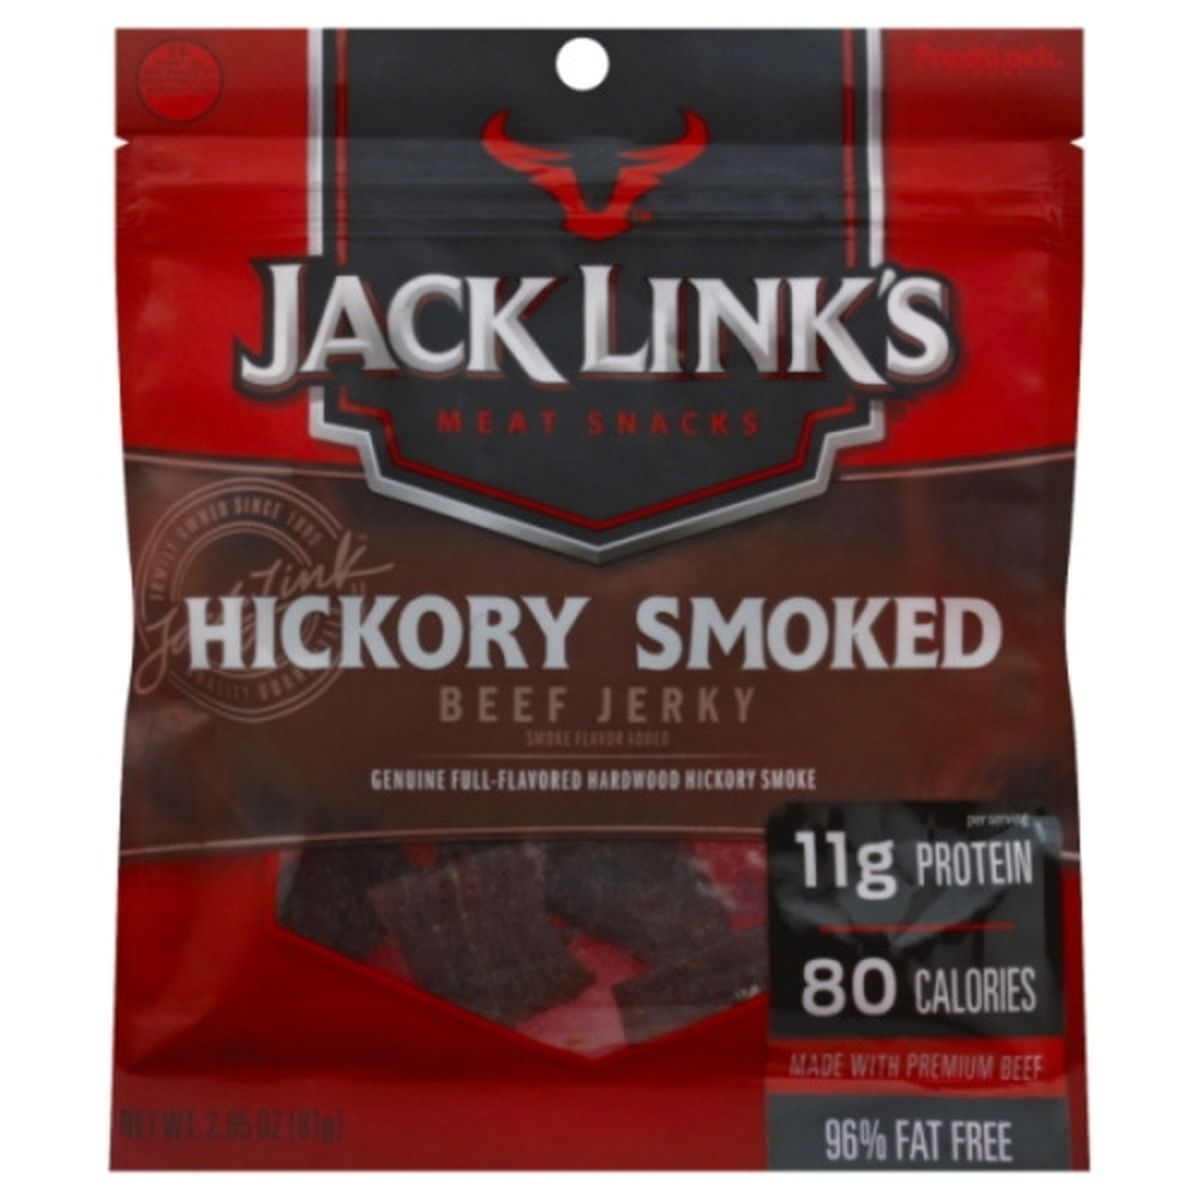 Calories in Jack Link's Beef Jerky, Hickory Smoked